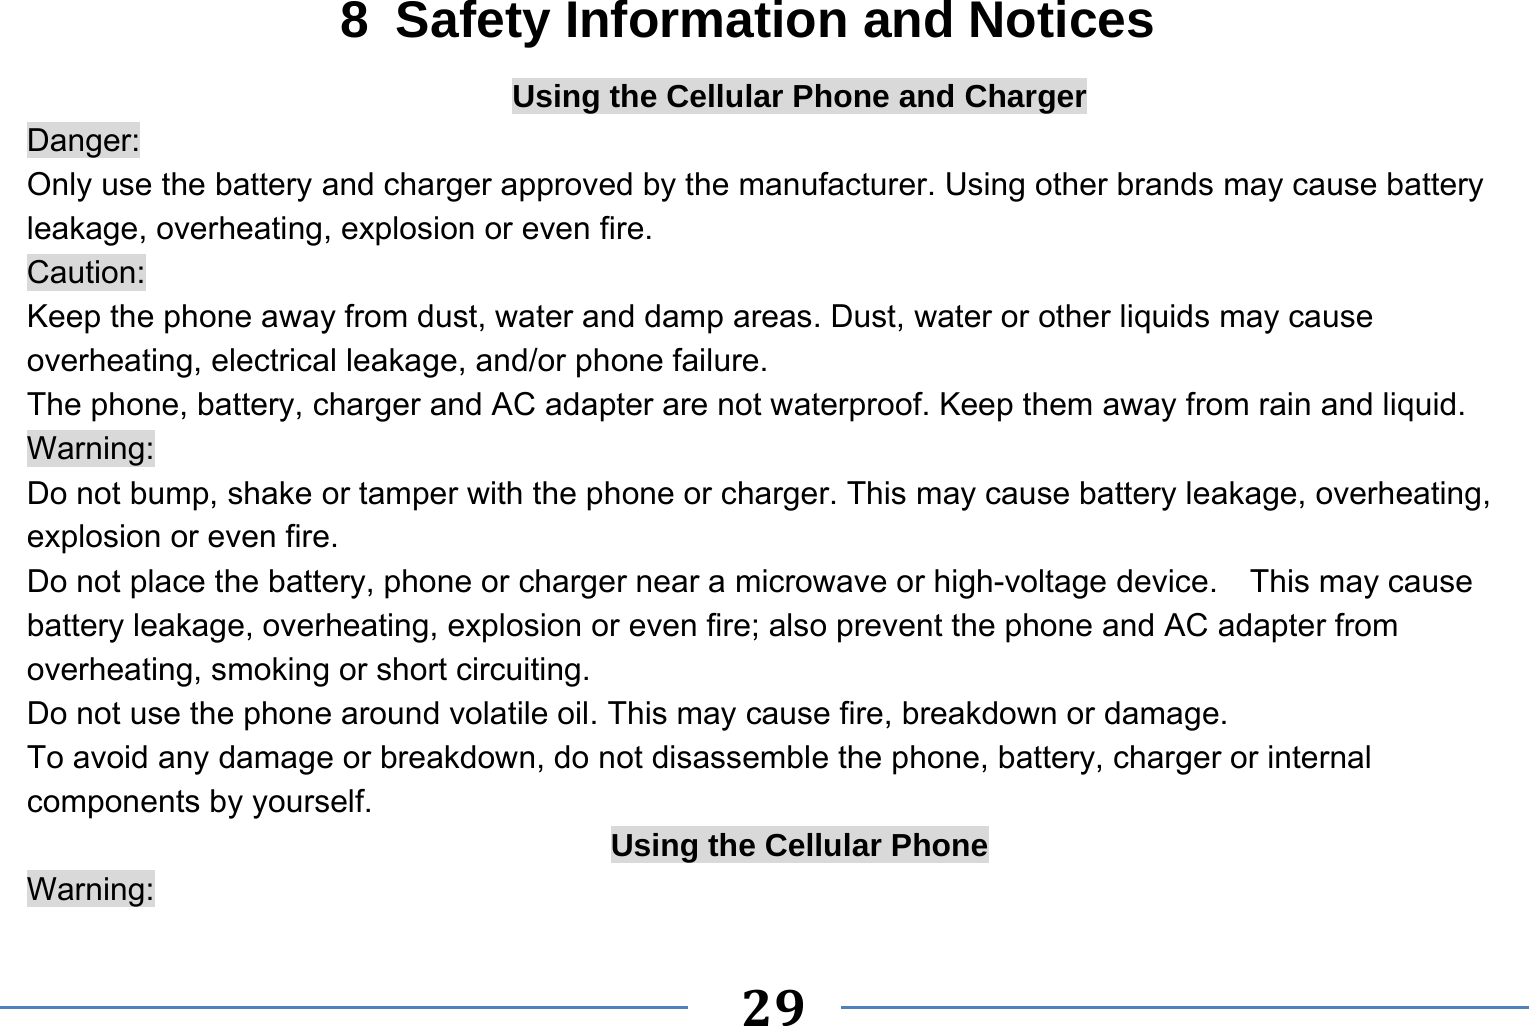   29   8  Safety Information and Notices Using the Cellular Phone and Charger Danger: Only use the battery and charger approved by the manufacturer. Using other brands may cause battery leakage, overheating, explosion or even fire. Caution: Keep the phone away from dust, water and damp areas. Dust, water or other liquids may cause overheating, electrical leakage, and/or phone failure.   The phone, battery, charger and AC adapter are not waterproof. Keep them away from rain and liquid. Warning: Do not bump, shake or tamper with the phone or charger. This may cause battery leakage, overheating, explosion or even fire. Do not place the battery, phone or charger near a microwave or high-voltage device.    This may cause battery leakage, overheating, explosion or even fire; also prevent the phone and AC adapter from overheating, smoking or short circuiting. Do not use the phone around volatile oil. This may cause fire, breakdown or damage. To avoid any damage or breakdown, do not disassemble the phone, battery, charger or internal components by yourself. Using the Cellular Phone Warning: 